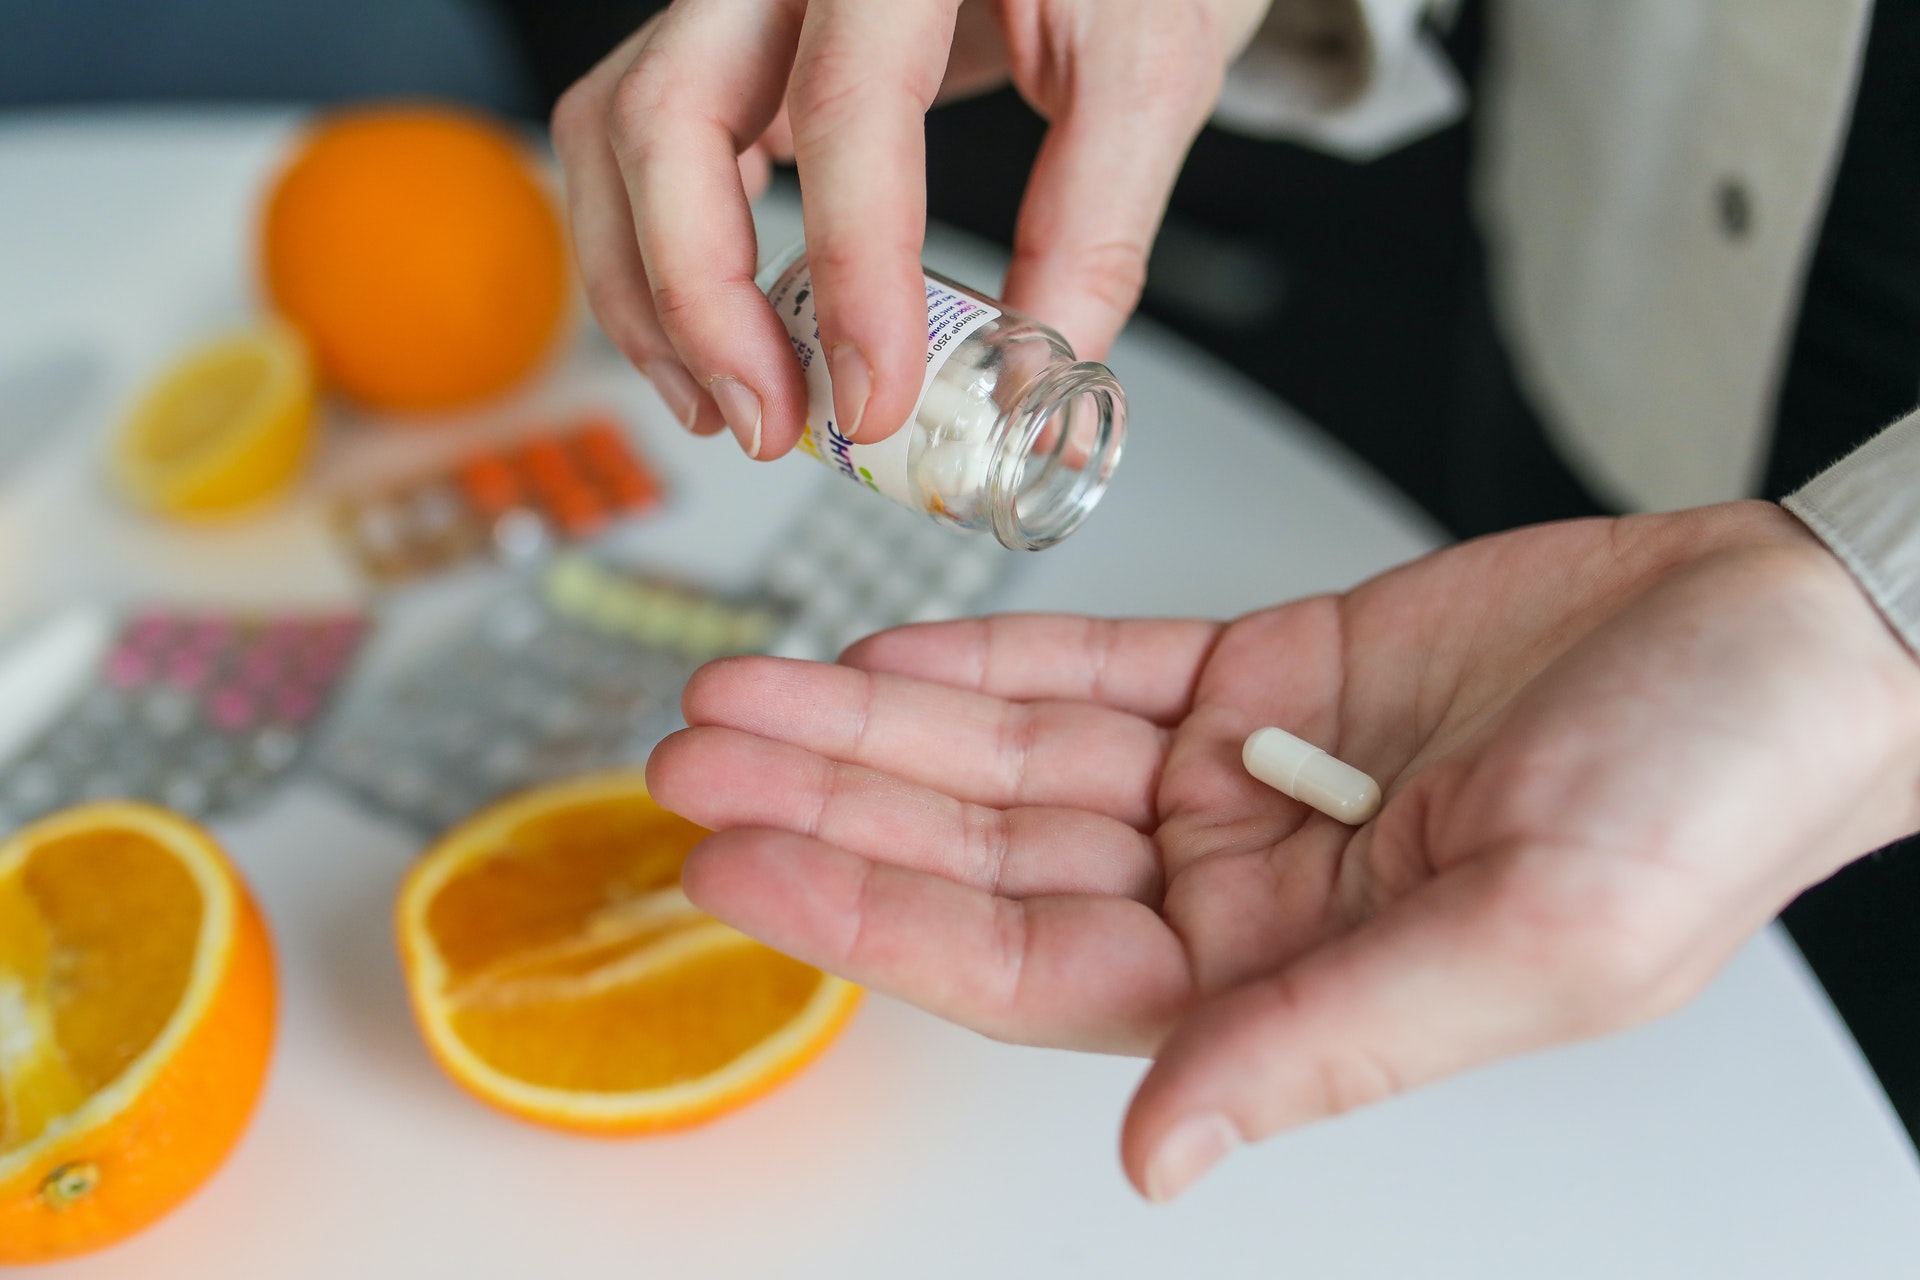 A person's hand holding a pill with orange slices in the background